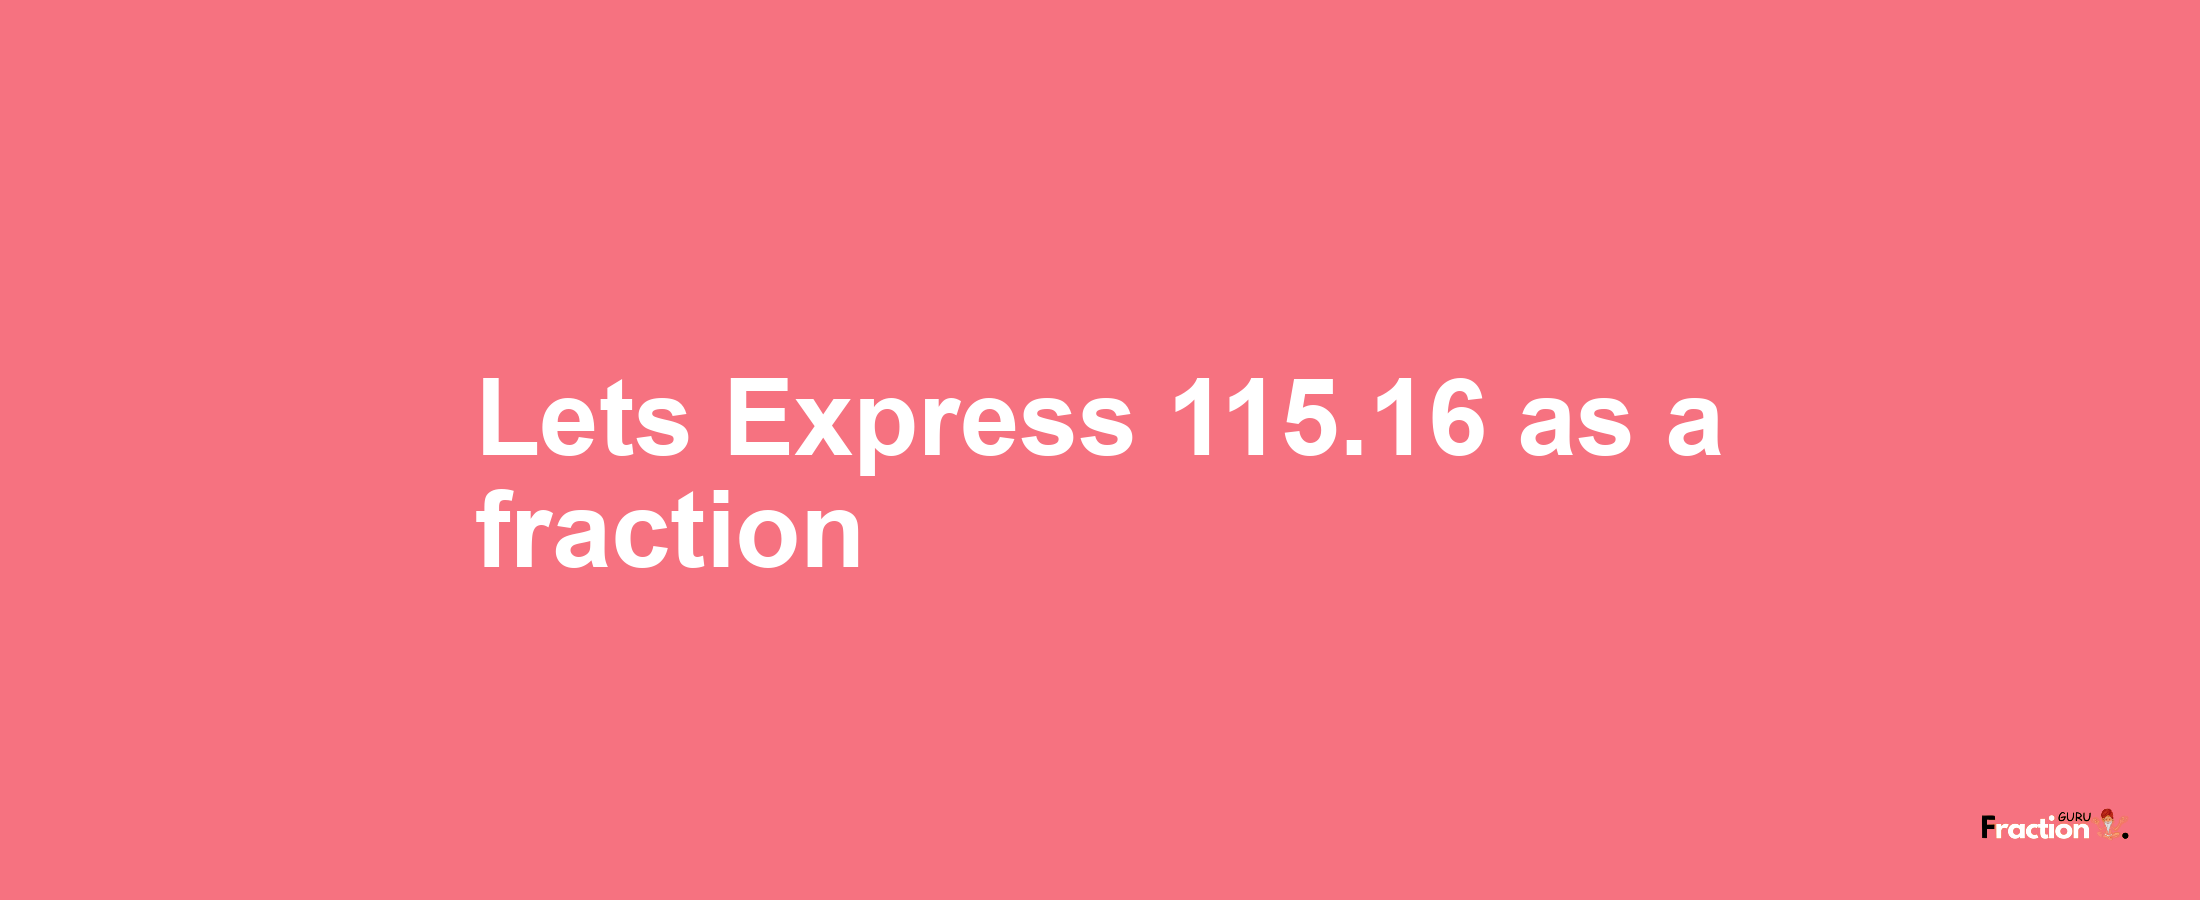 Lets Express 115.16 as afraction